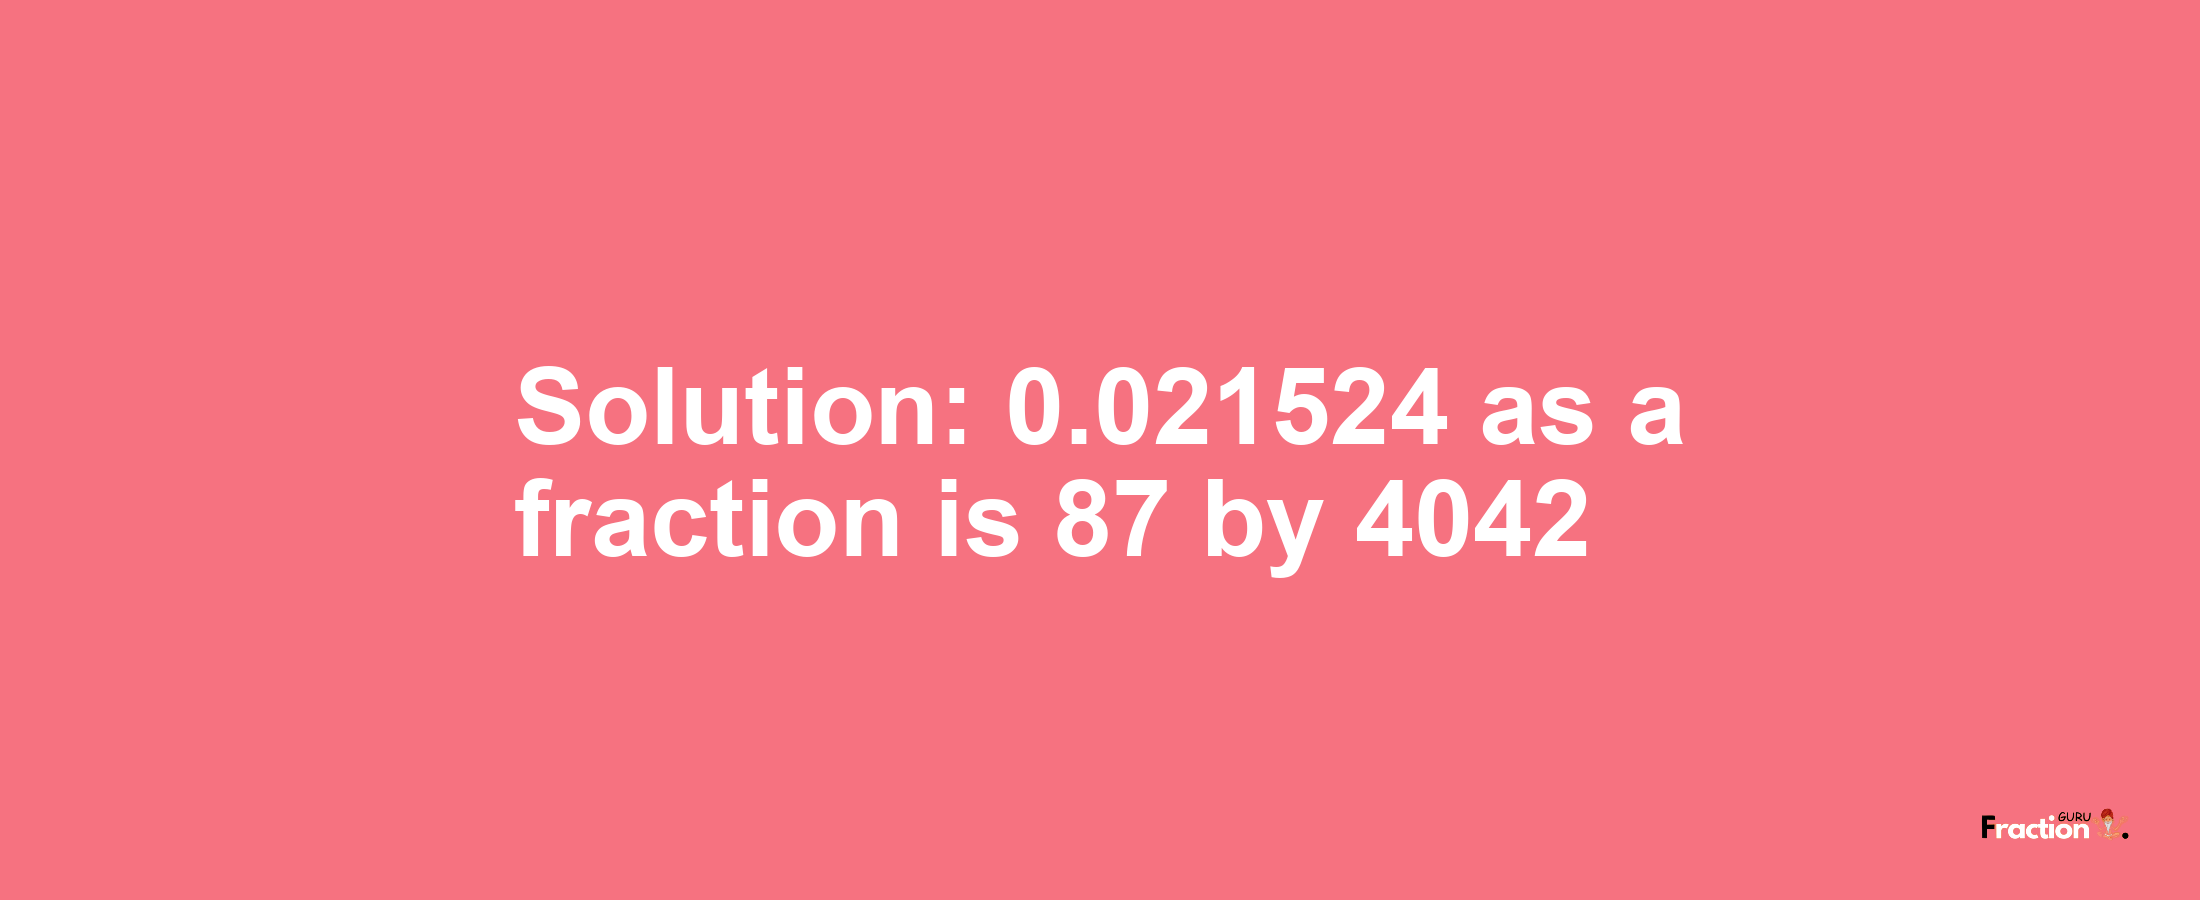 Solution:0.021524 as a fraction is 87/4042